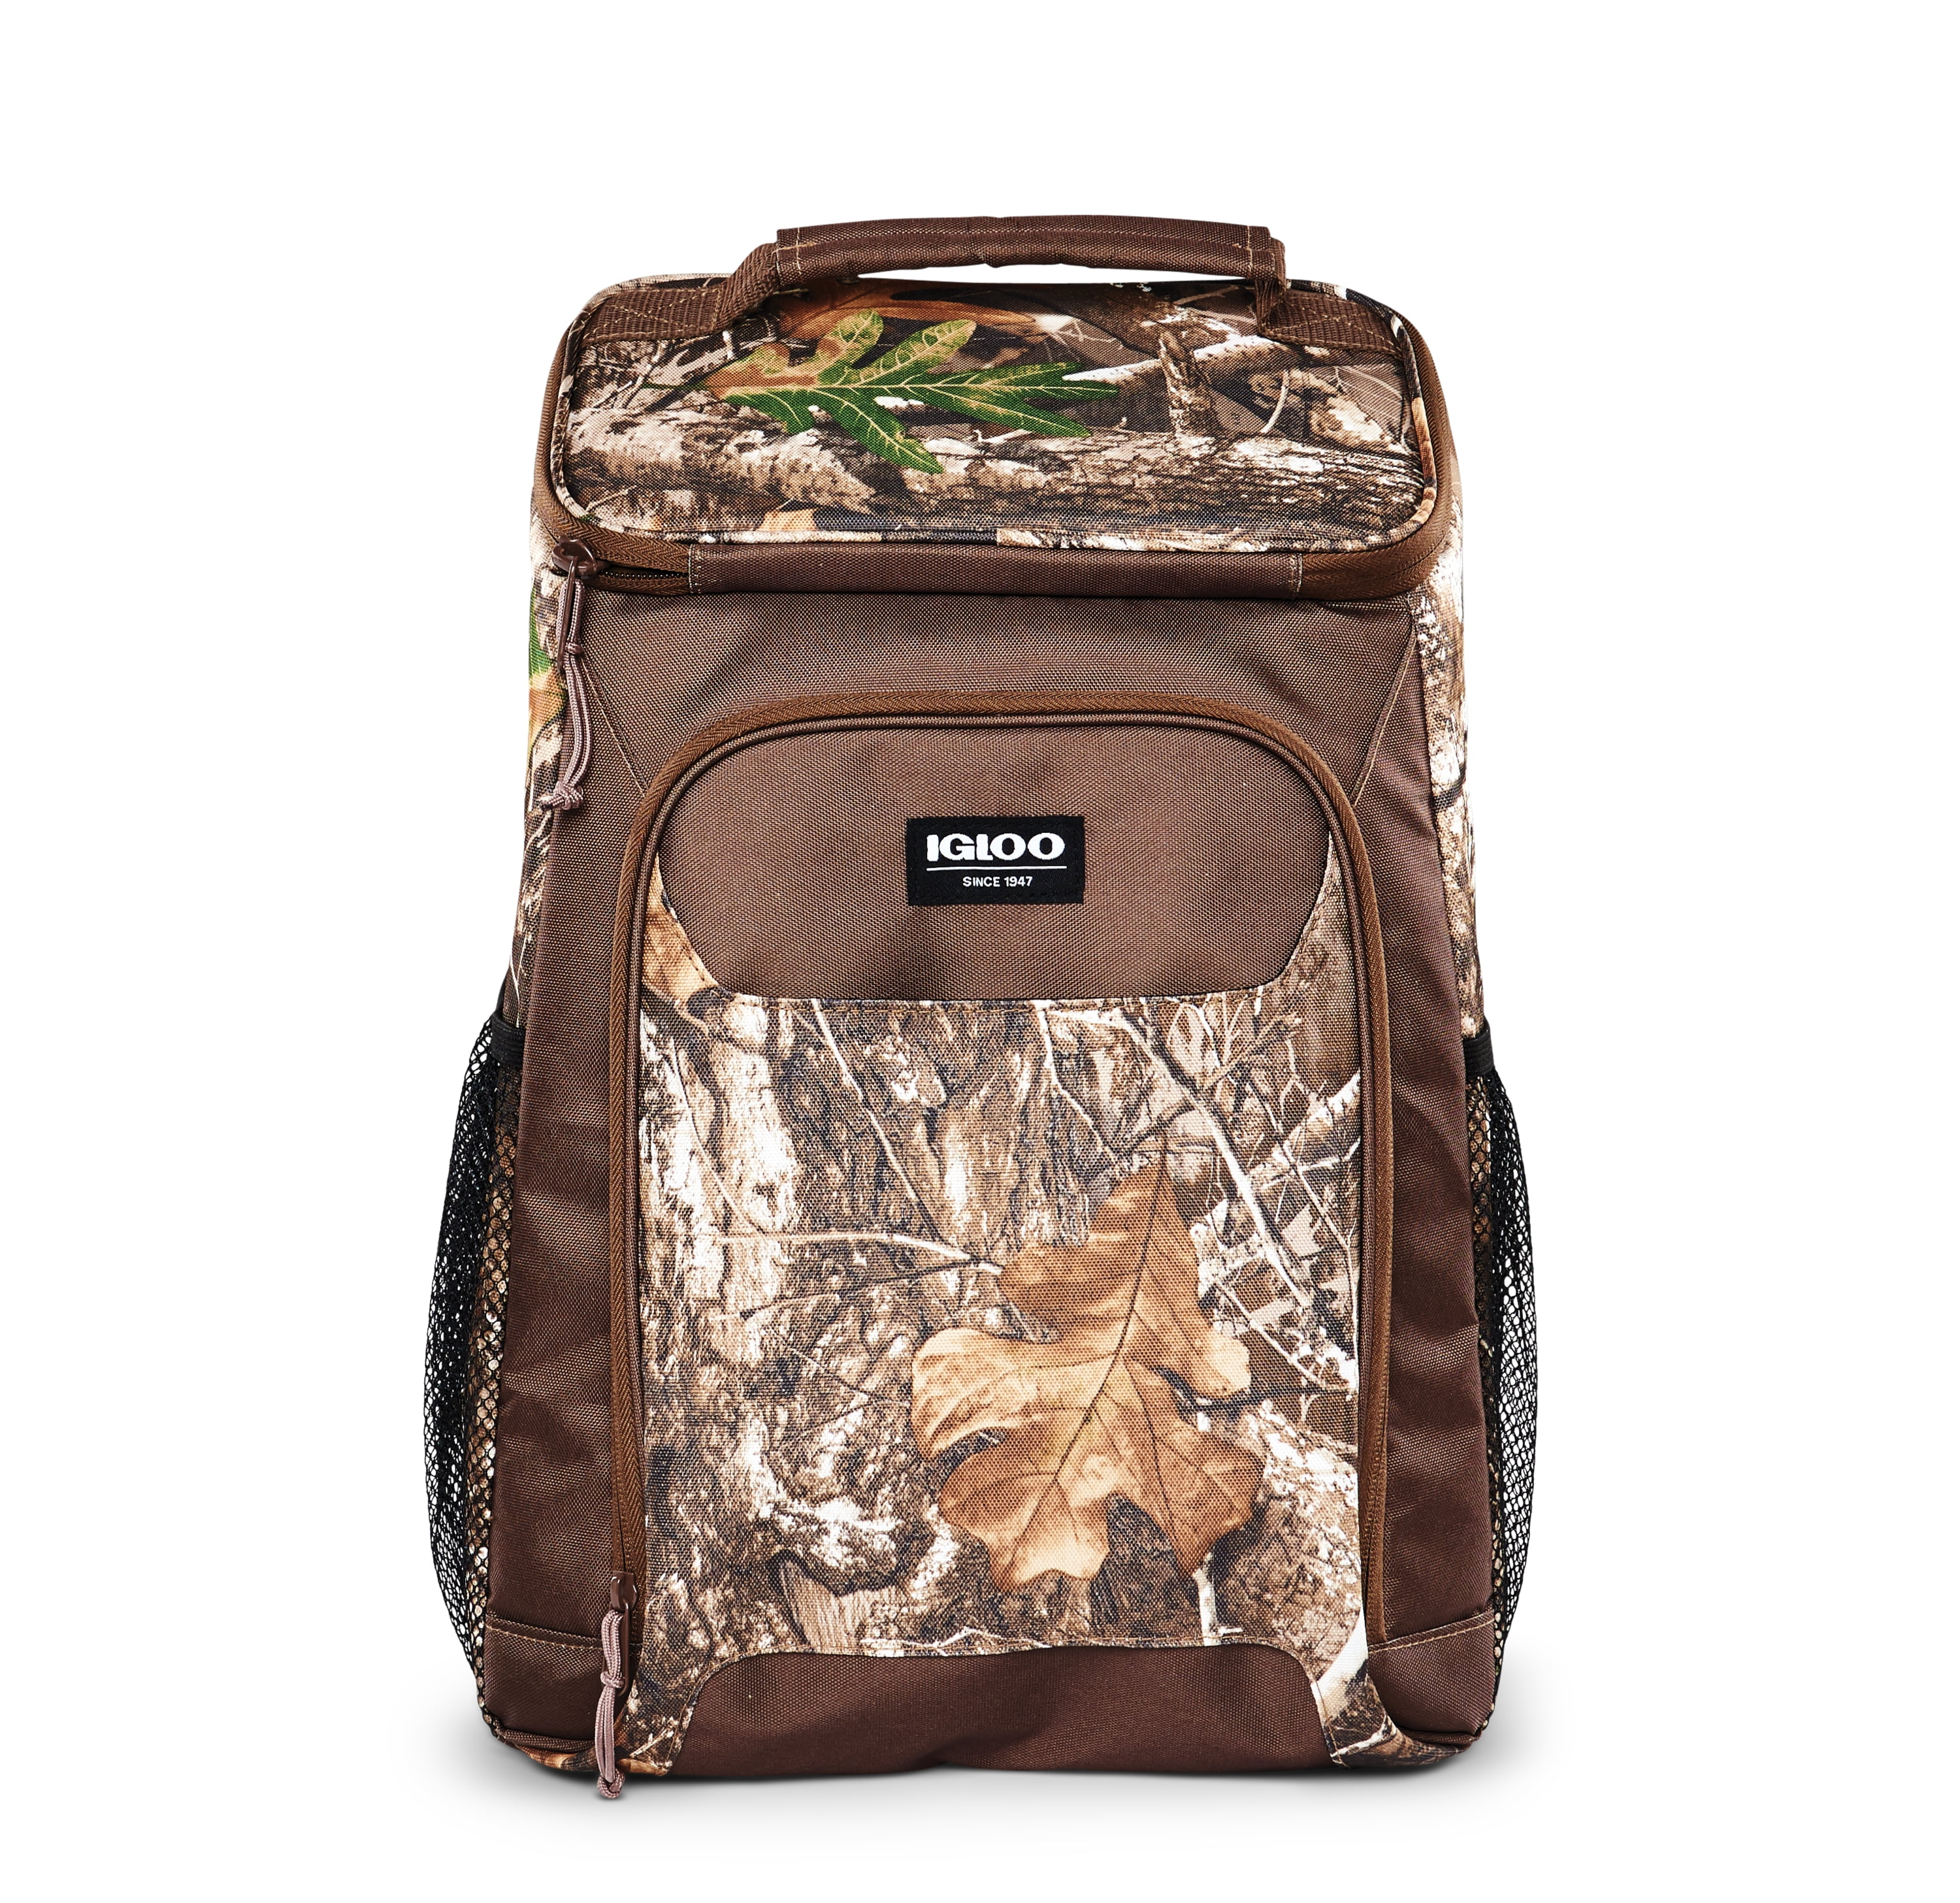 Igloo Top Grip Backpack 24 Can Cooler - Real Tree Camo